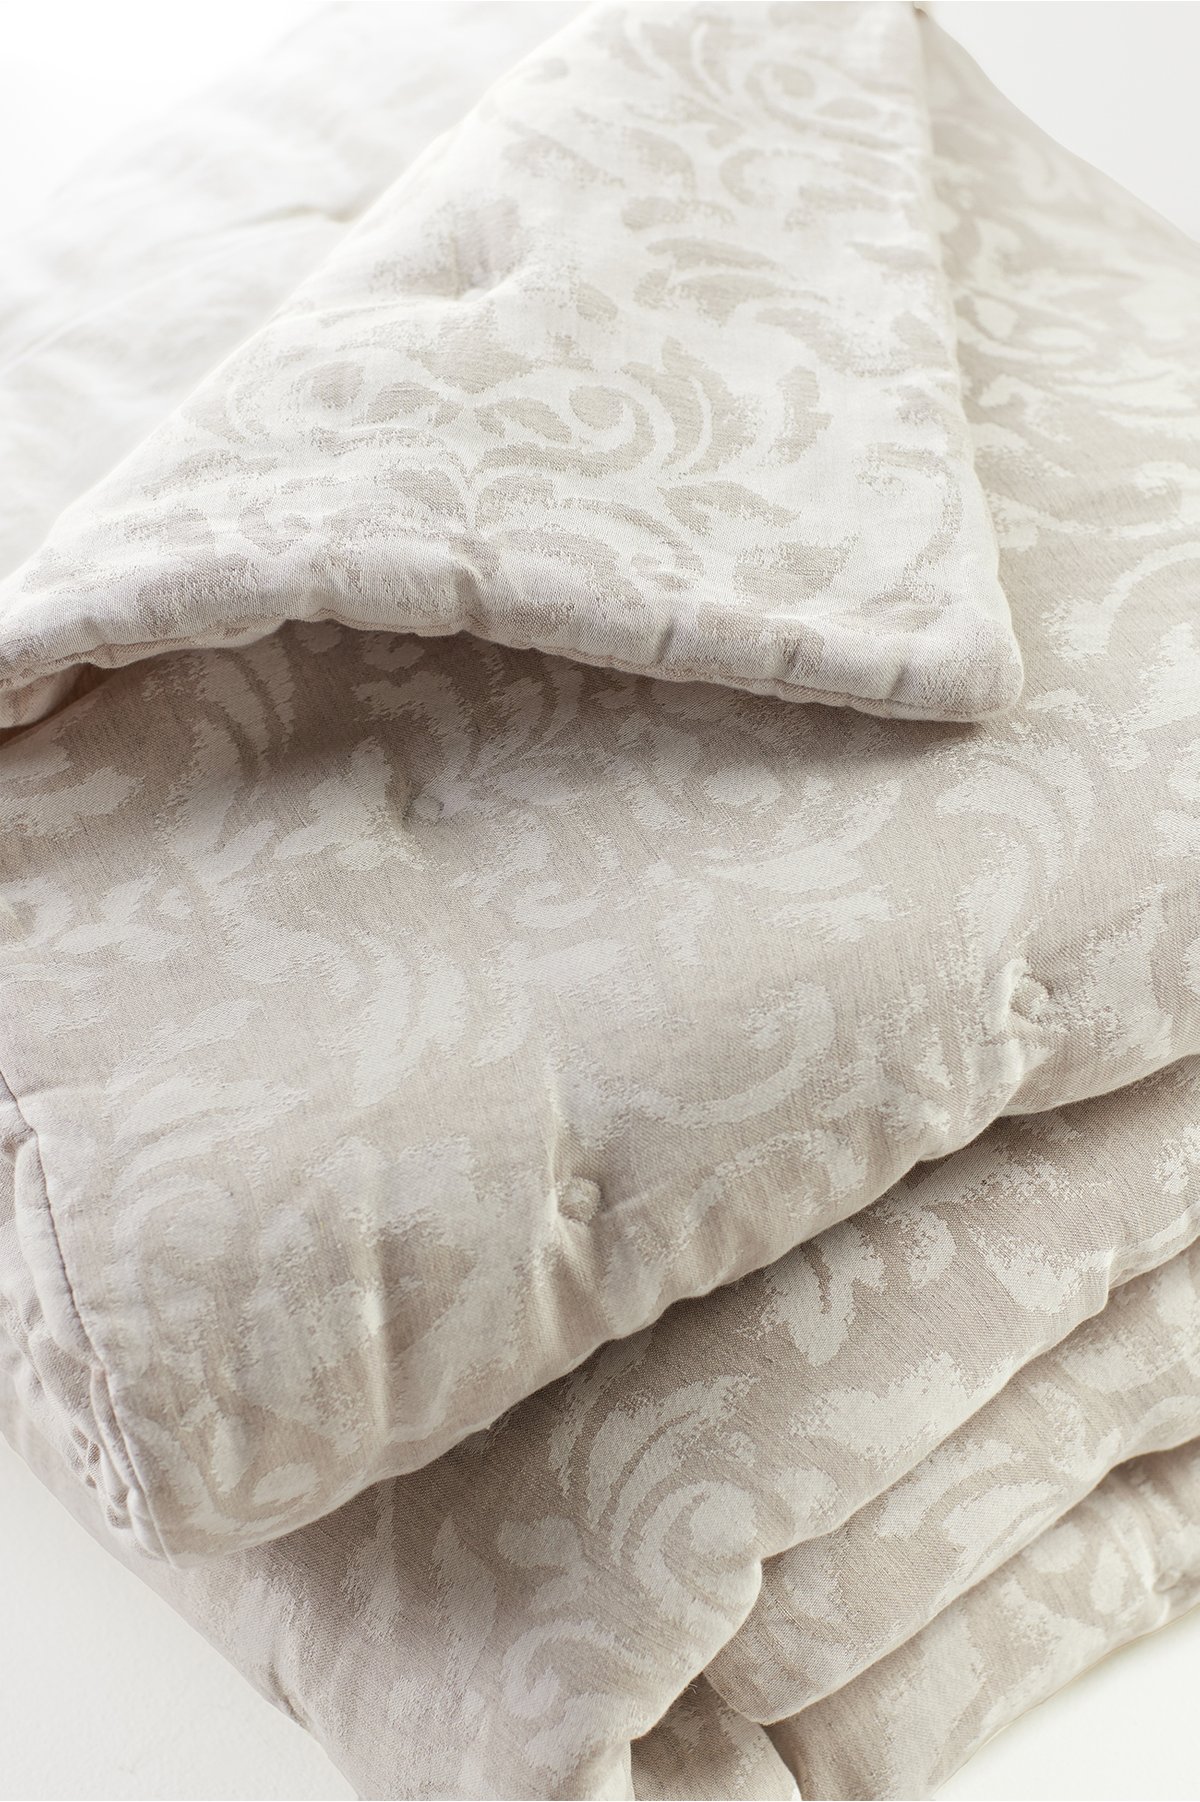 Rosalyn Damask Comforter by Soft Surroundings, in Rose Sand size King